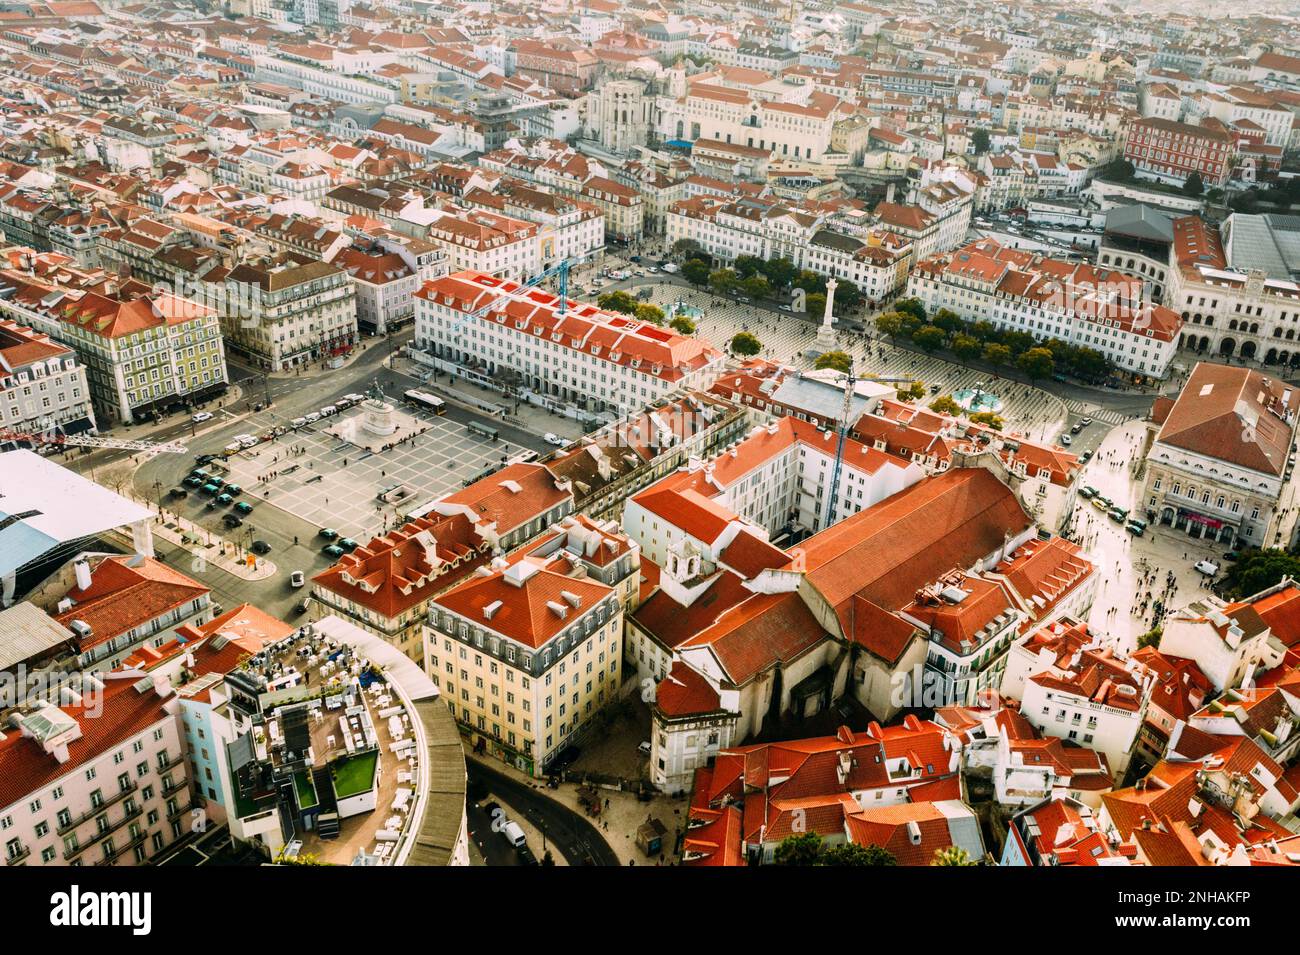 Aerial drone view of major squares and landmarks in Lisbon's Baixa District, including Figueira and Rossio Squares Stock Photo